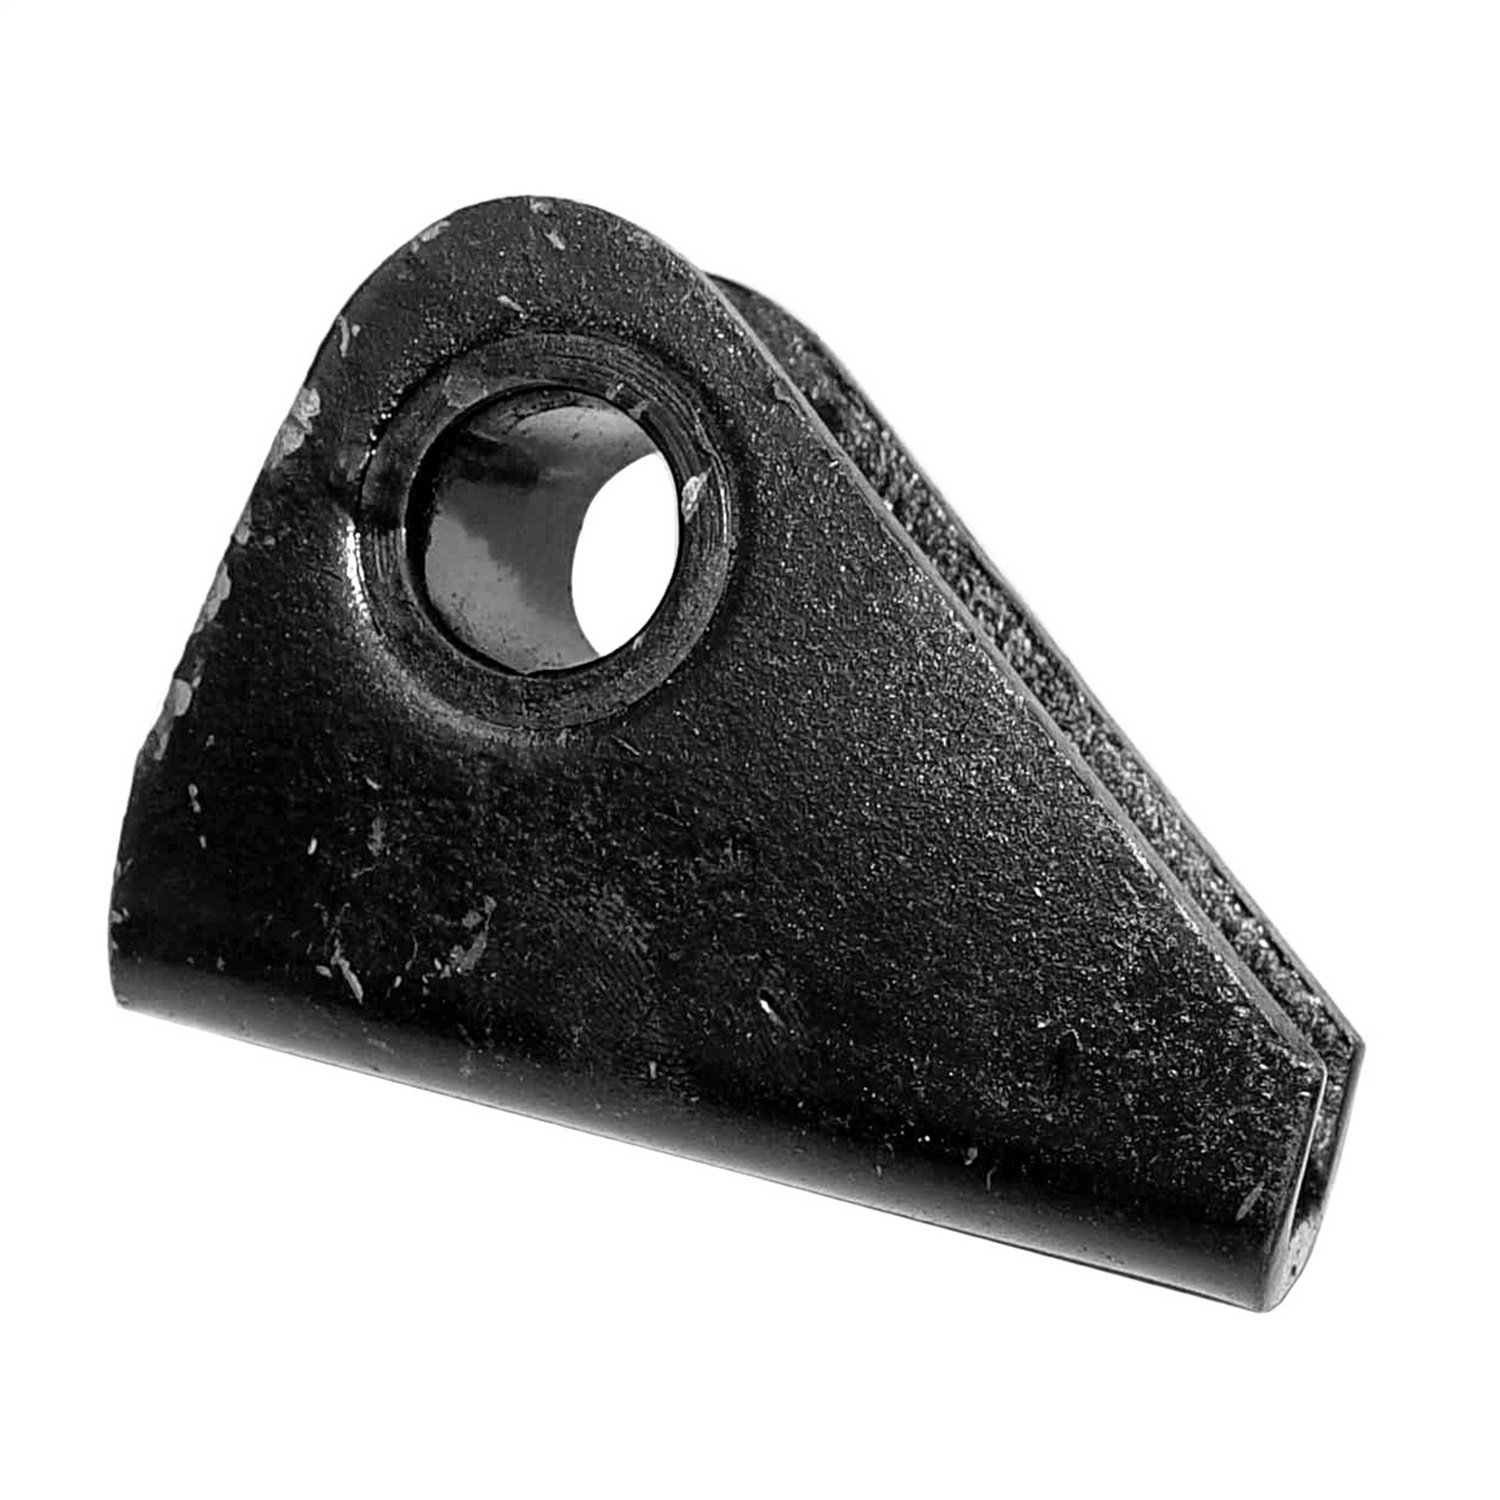 Replacement rear shackle bracket from Omix-ADA, Fits 55-75 Jeep CJ5 and CJ6